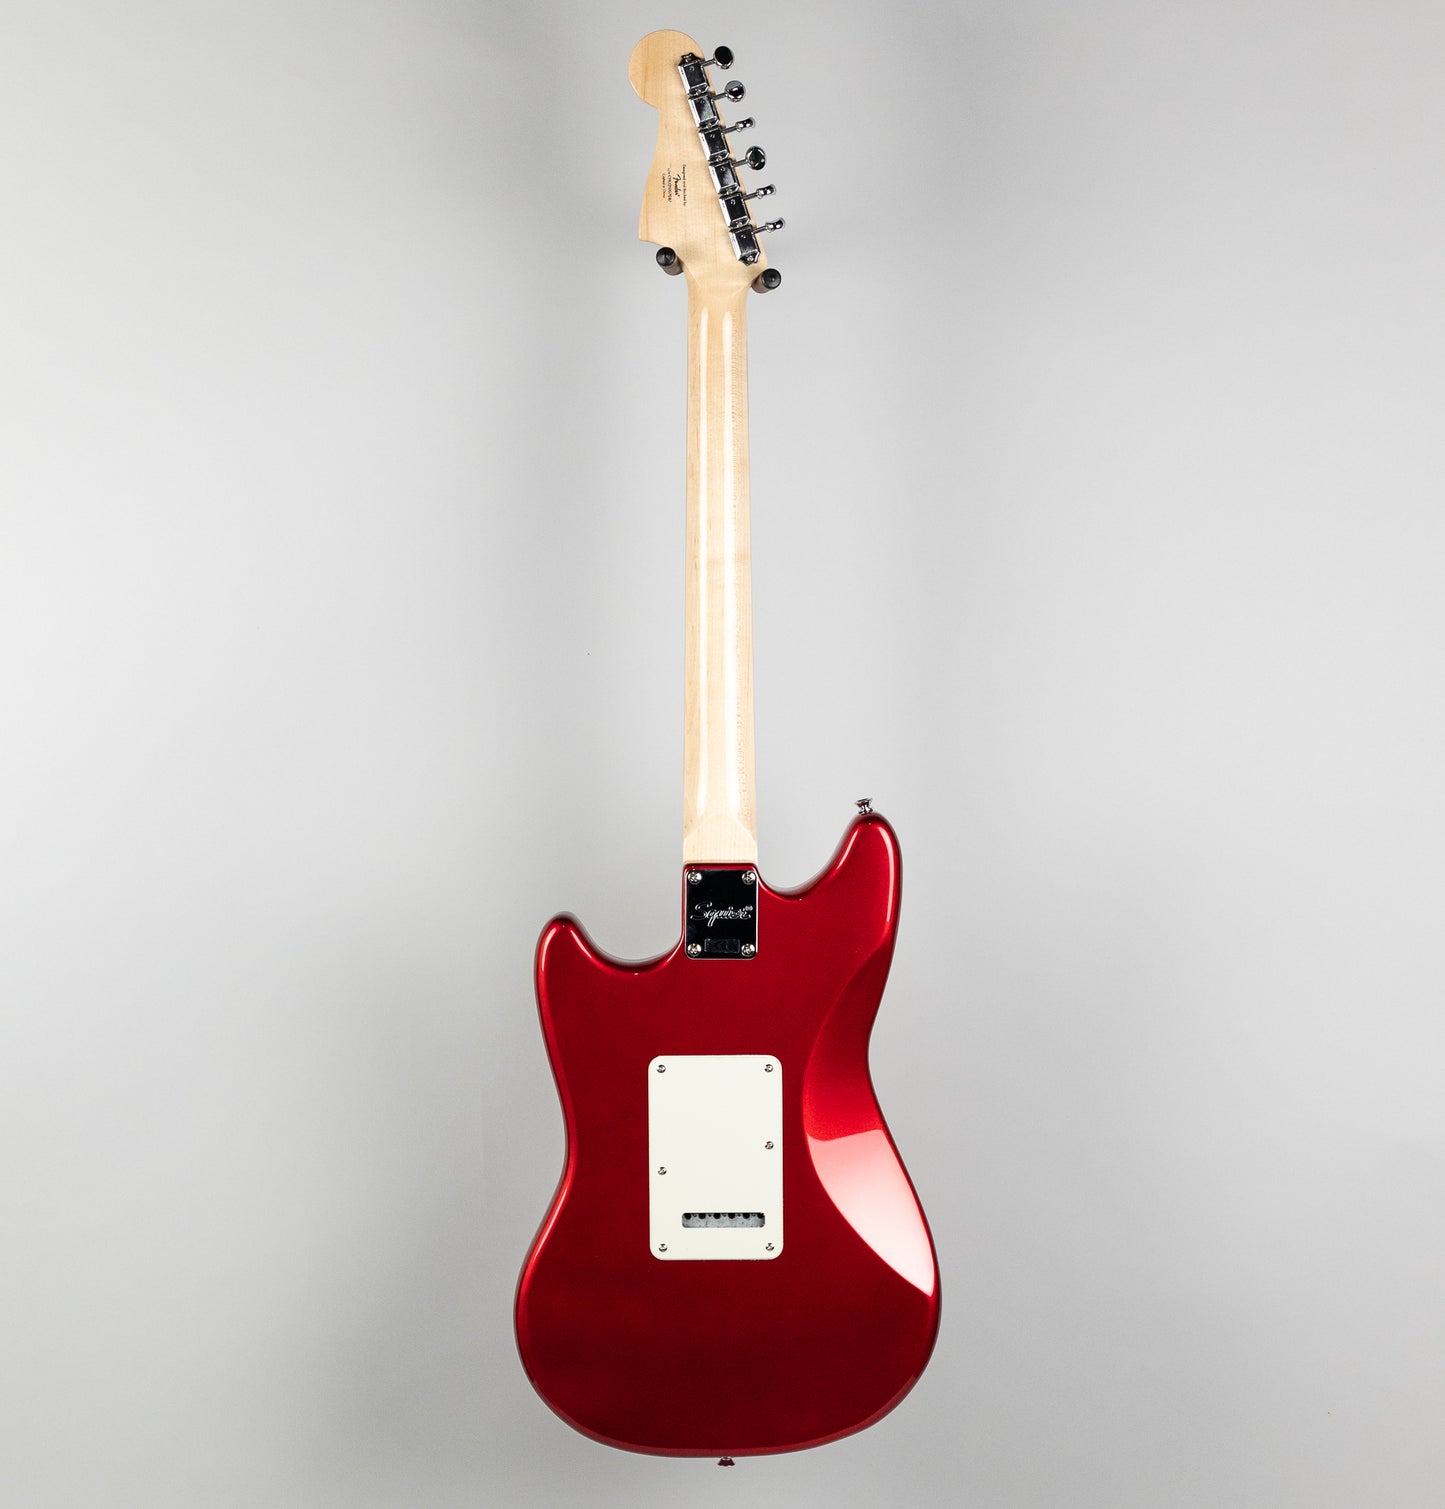 Squier Paranormal Cyclone in Candy Apple Red